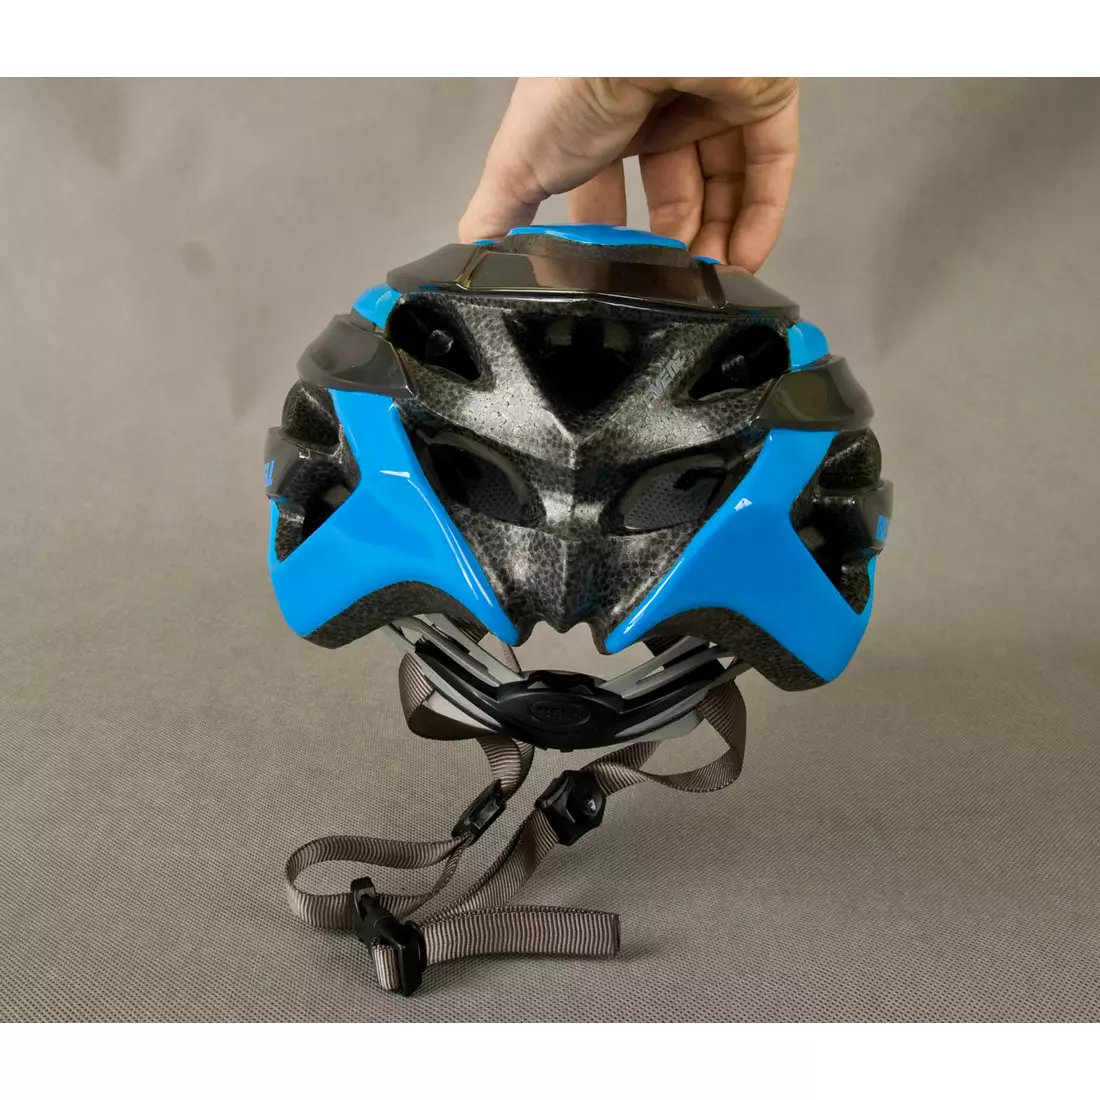 BELL EVENT bicycle helmet, black and blue